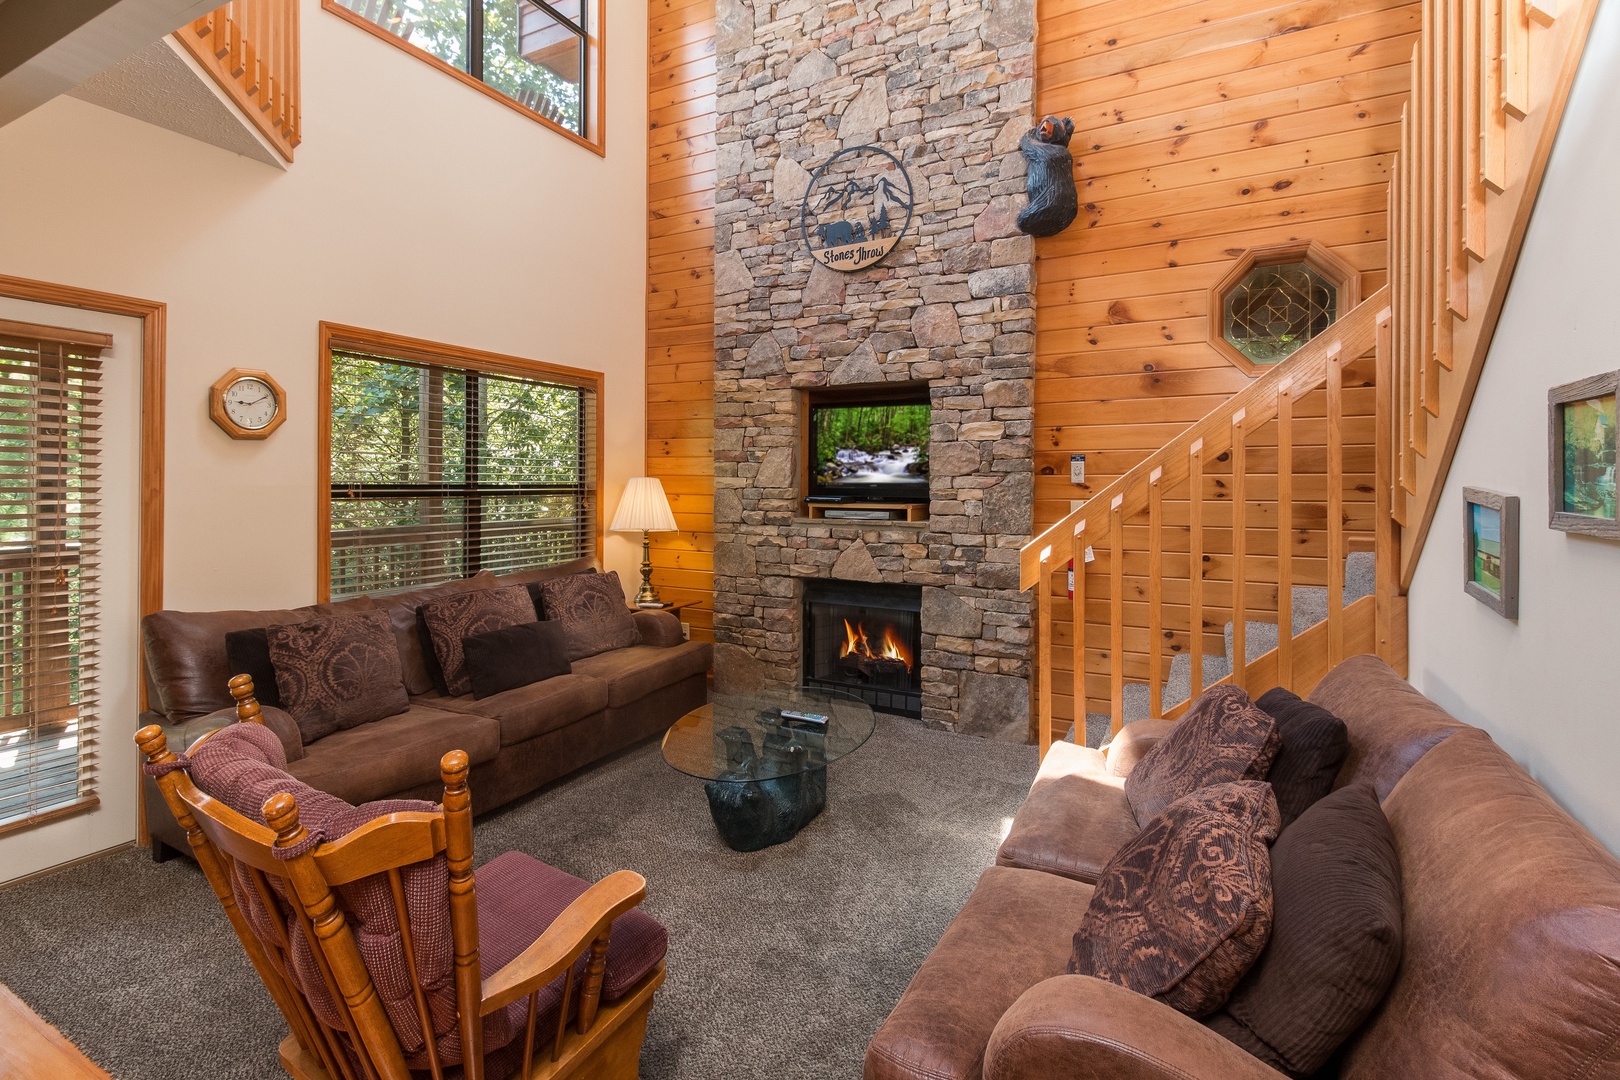 Living room with fireplace and TV at Stones Throw a 4 bedroom cabin rental located in pigeon forge